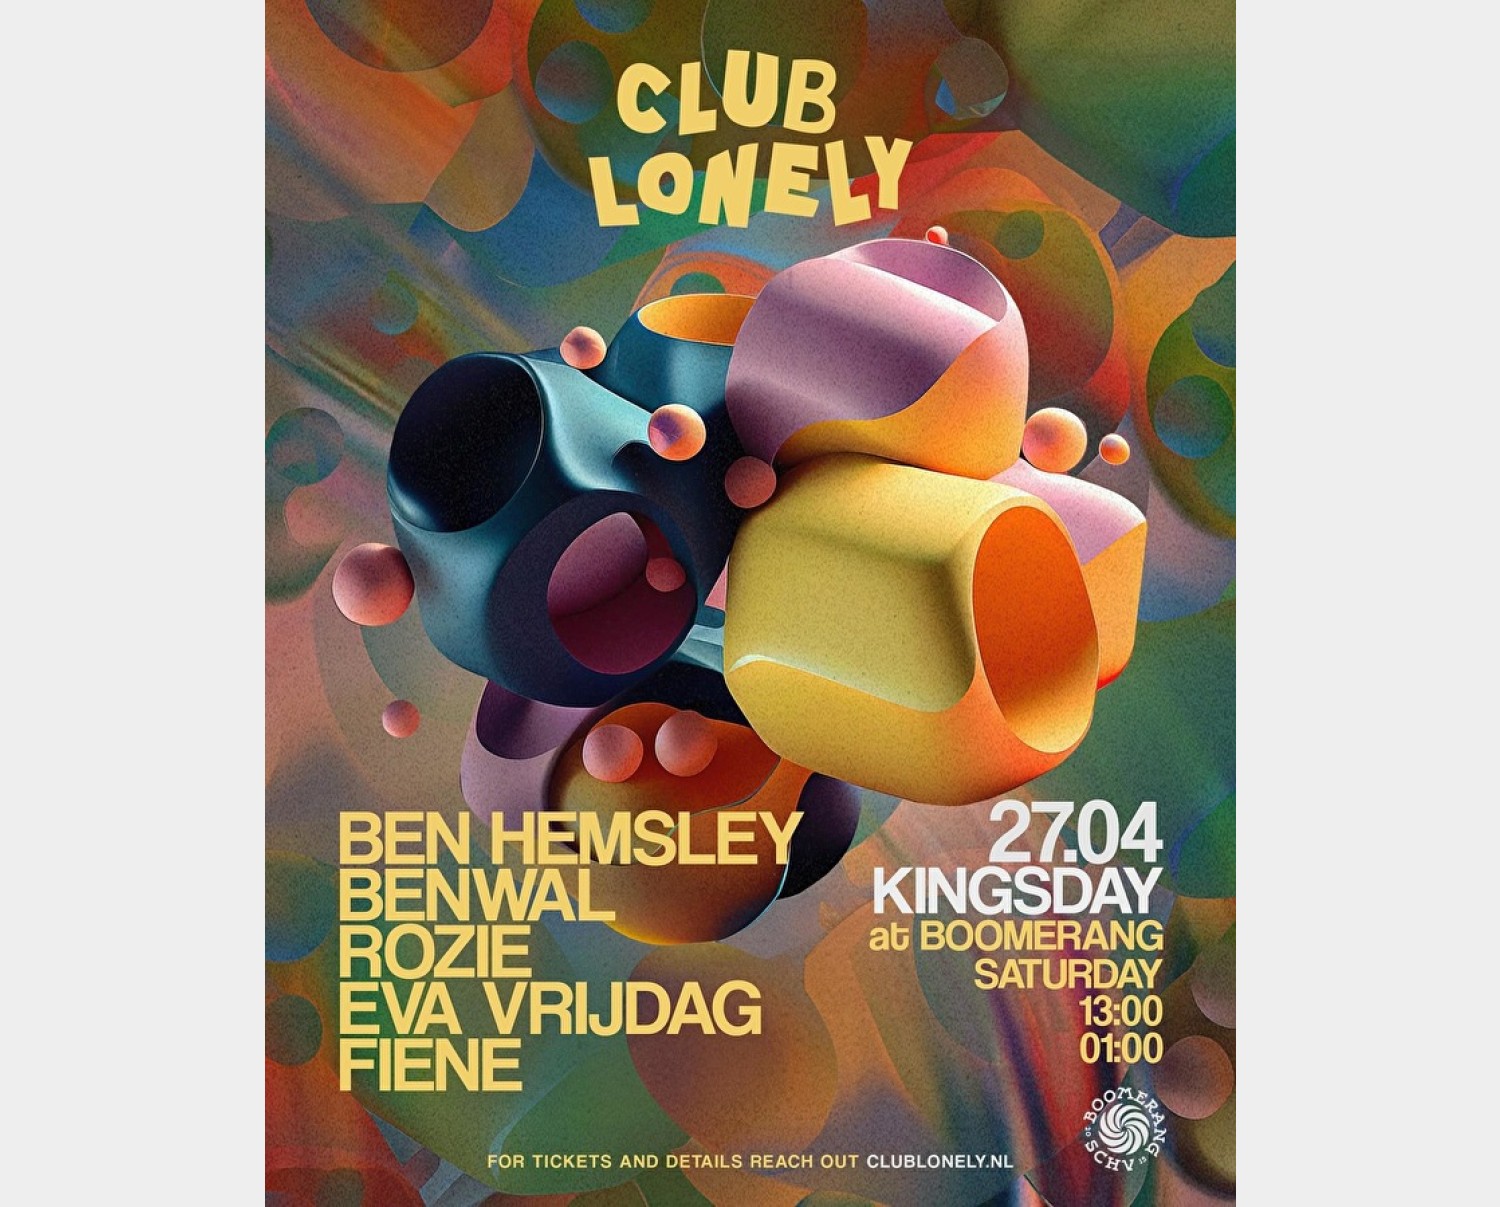 Kingsday - Club Lonely